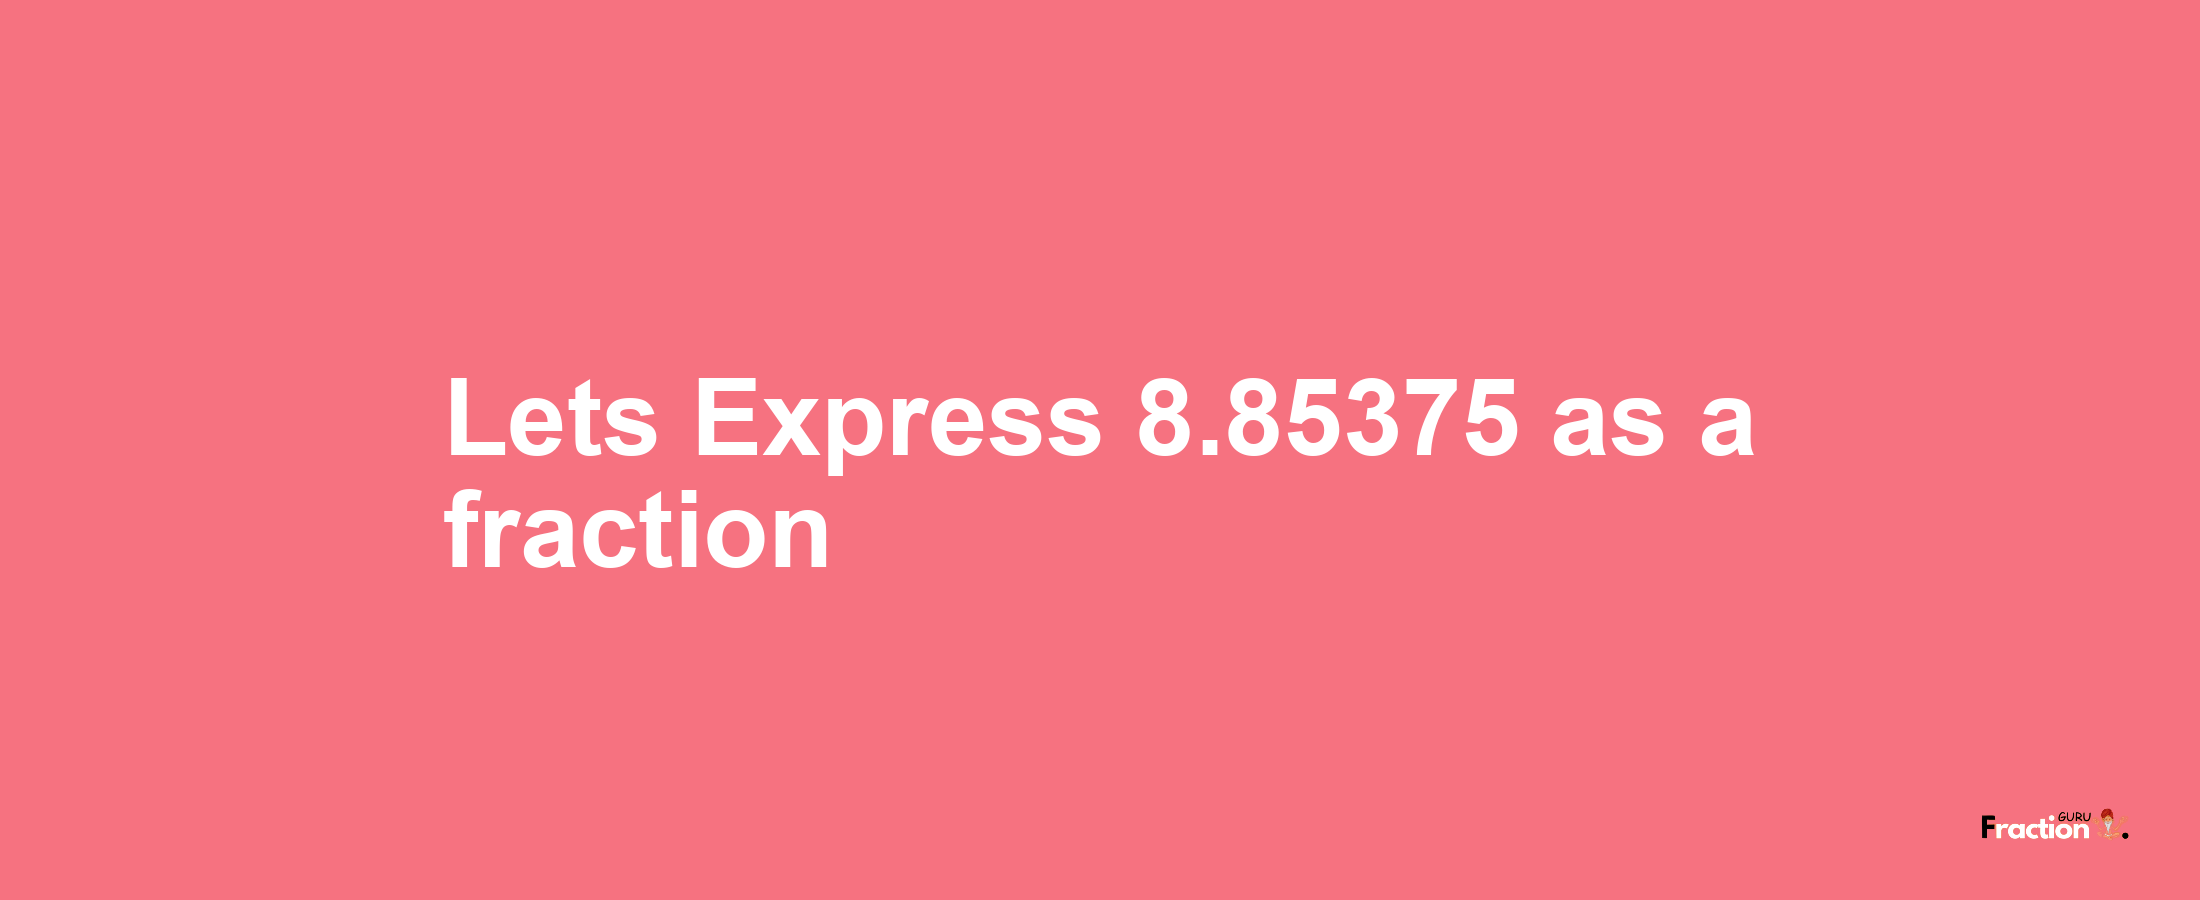 Lets Express 8.85375 as afraction